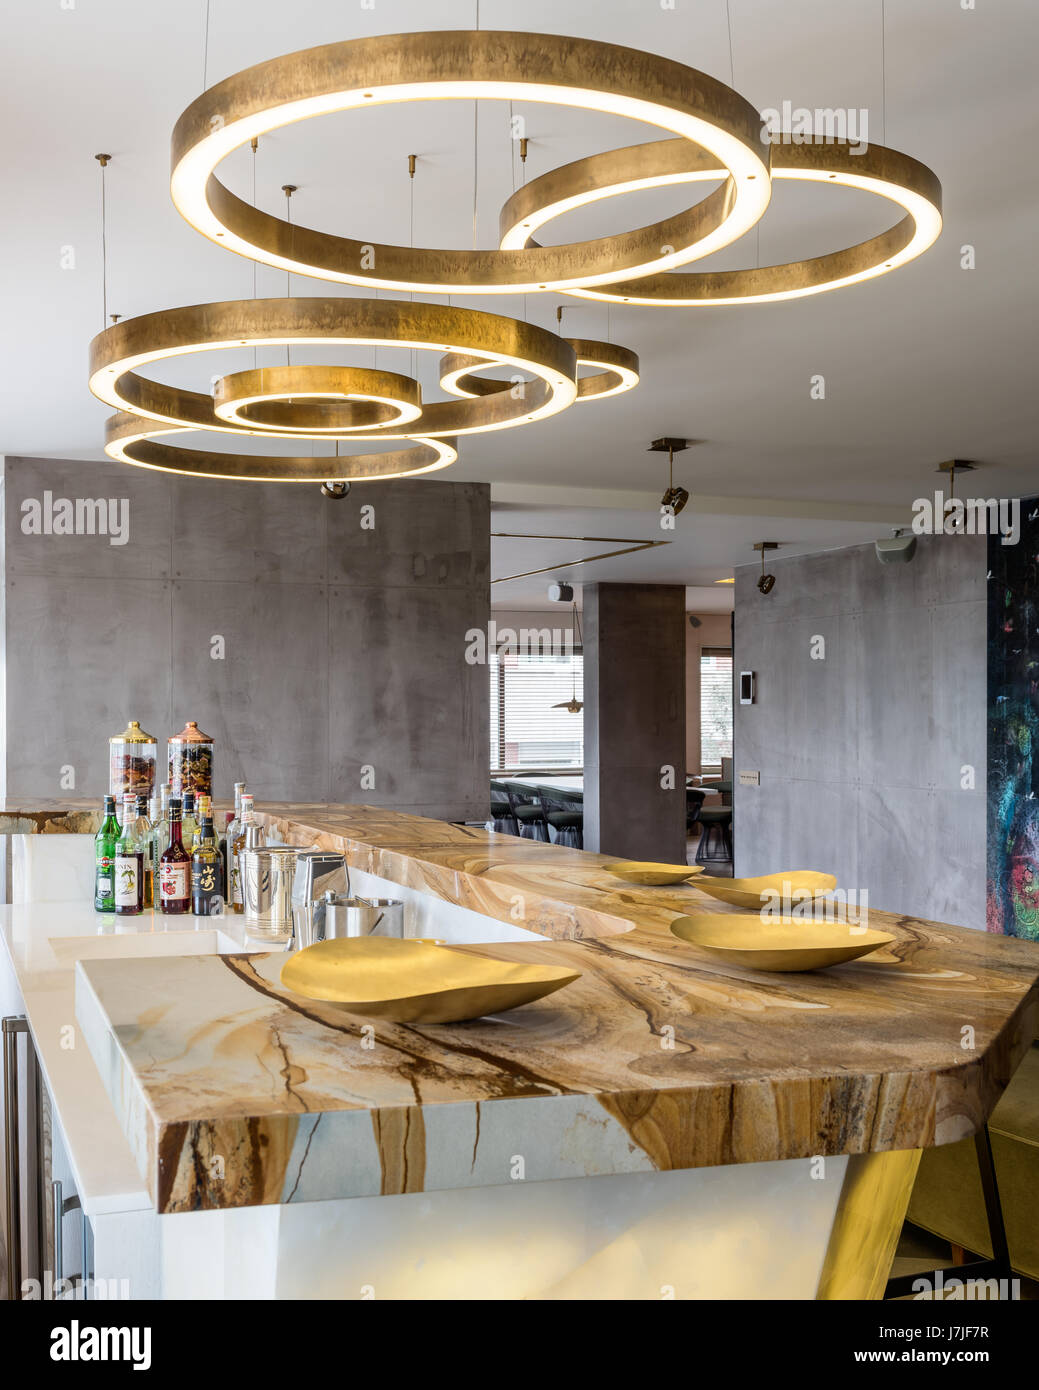 Circular brass light fittings above stonewood marble and onyx bar in Istanbul apartment Stock Photo